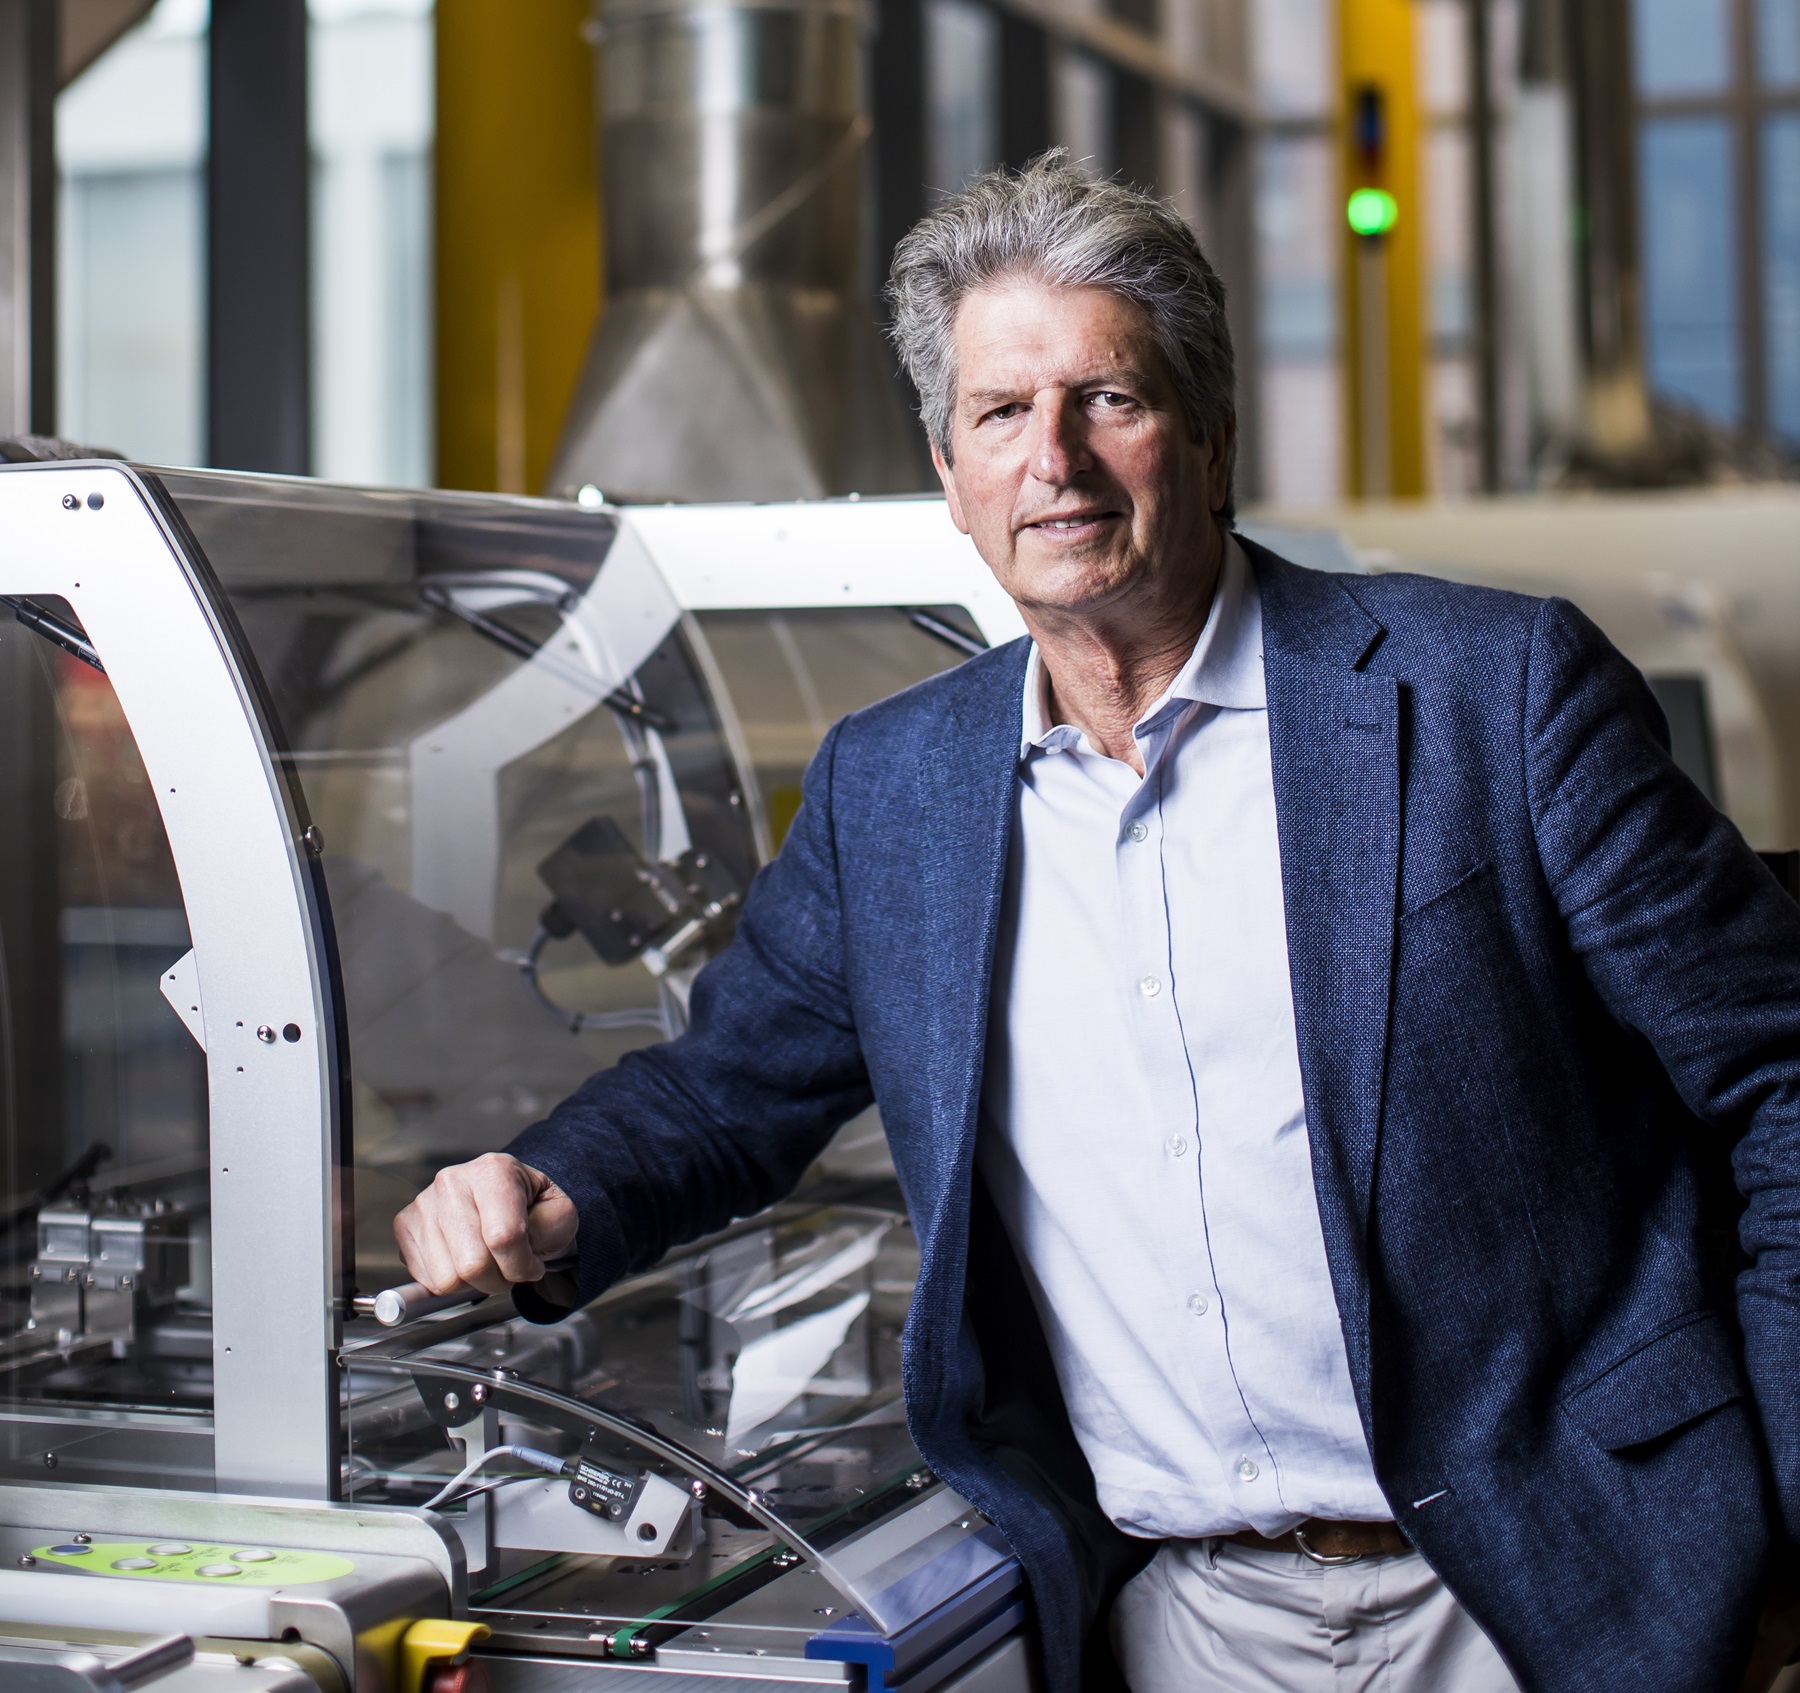 Martin Green, Scientia Professor at UNSW in Sydney, Australia, is the winner of the 2023 Leigh Ann Conn Prize for Renewable Energy from the University of Louisville. Photo by Anna Kucera.